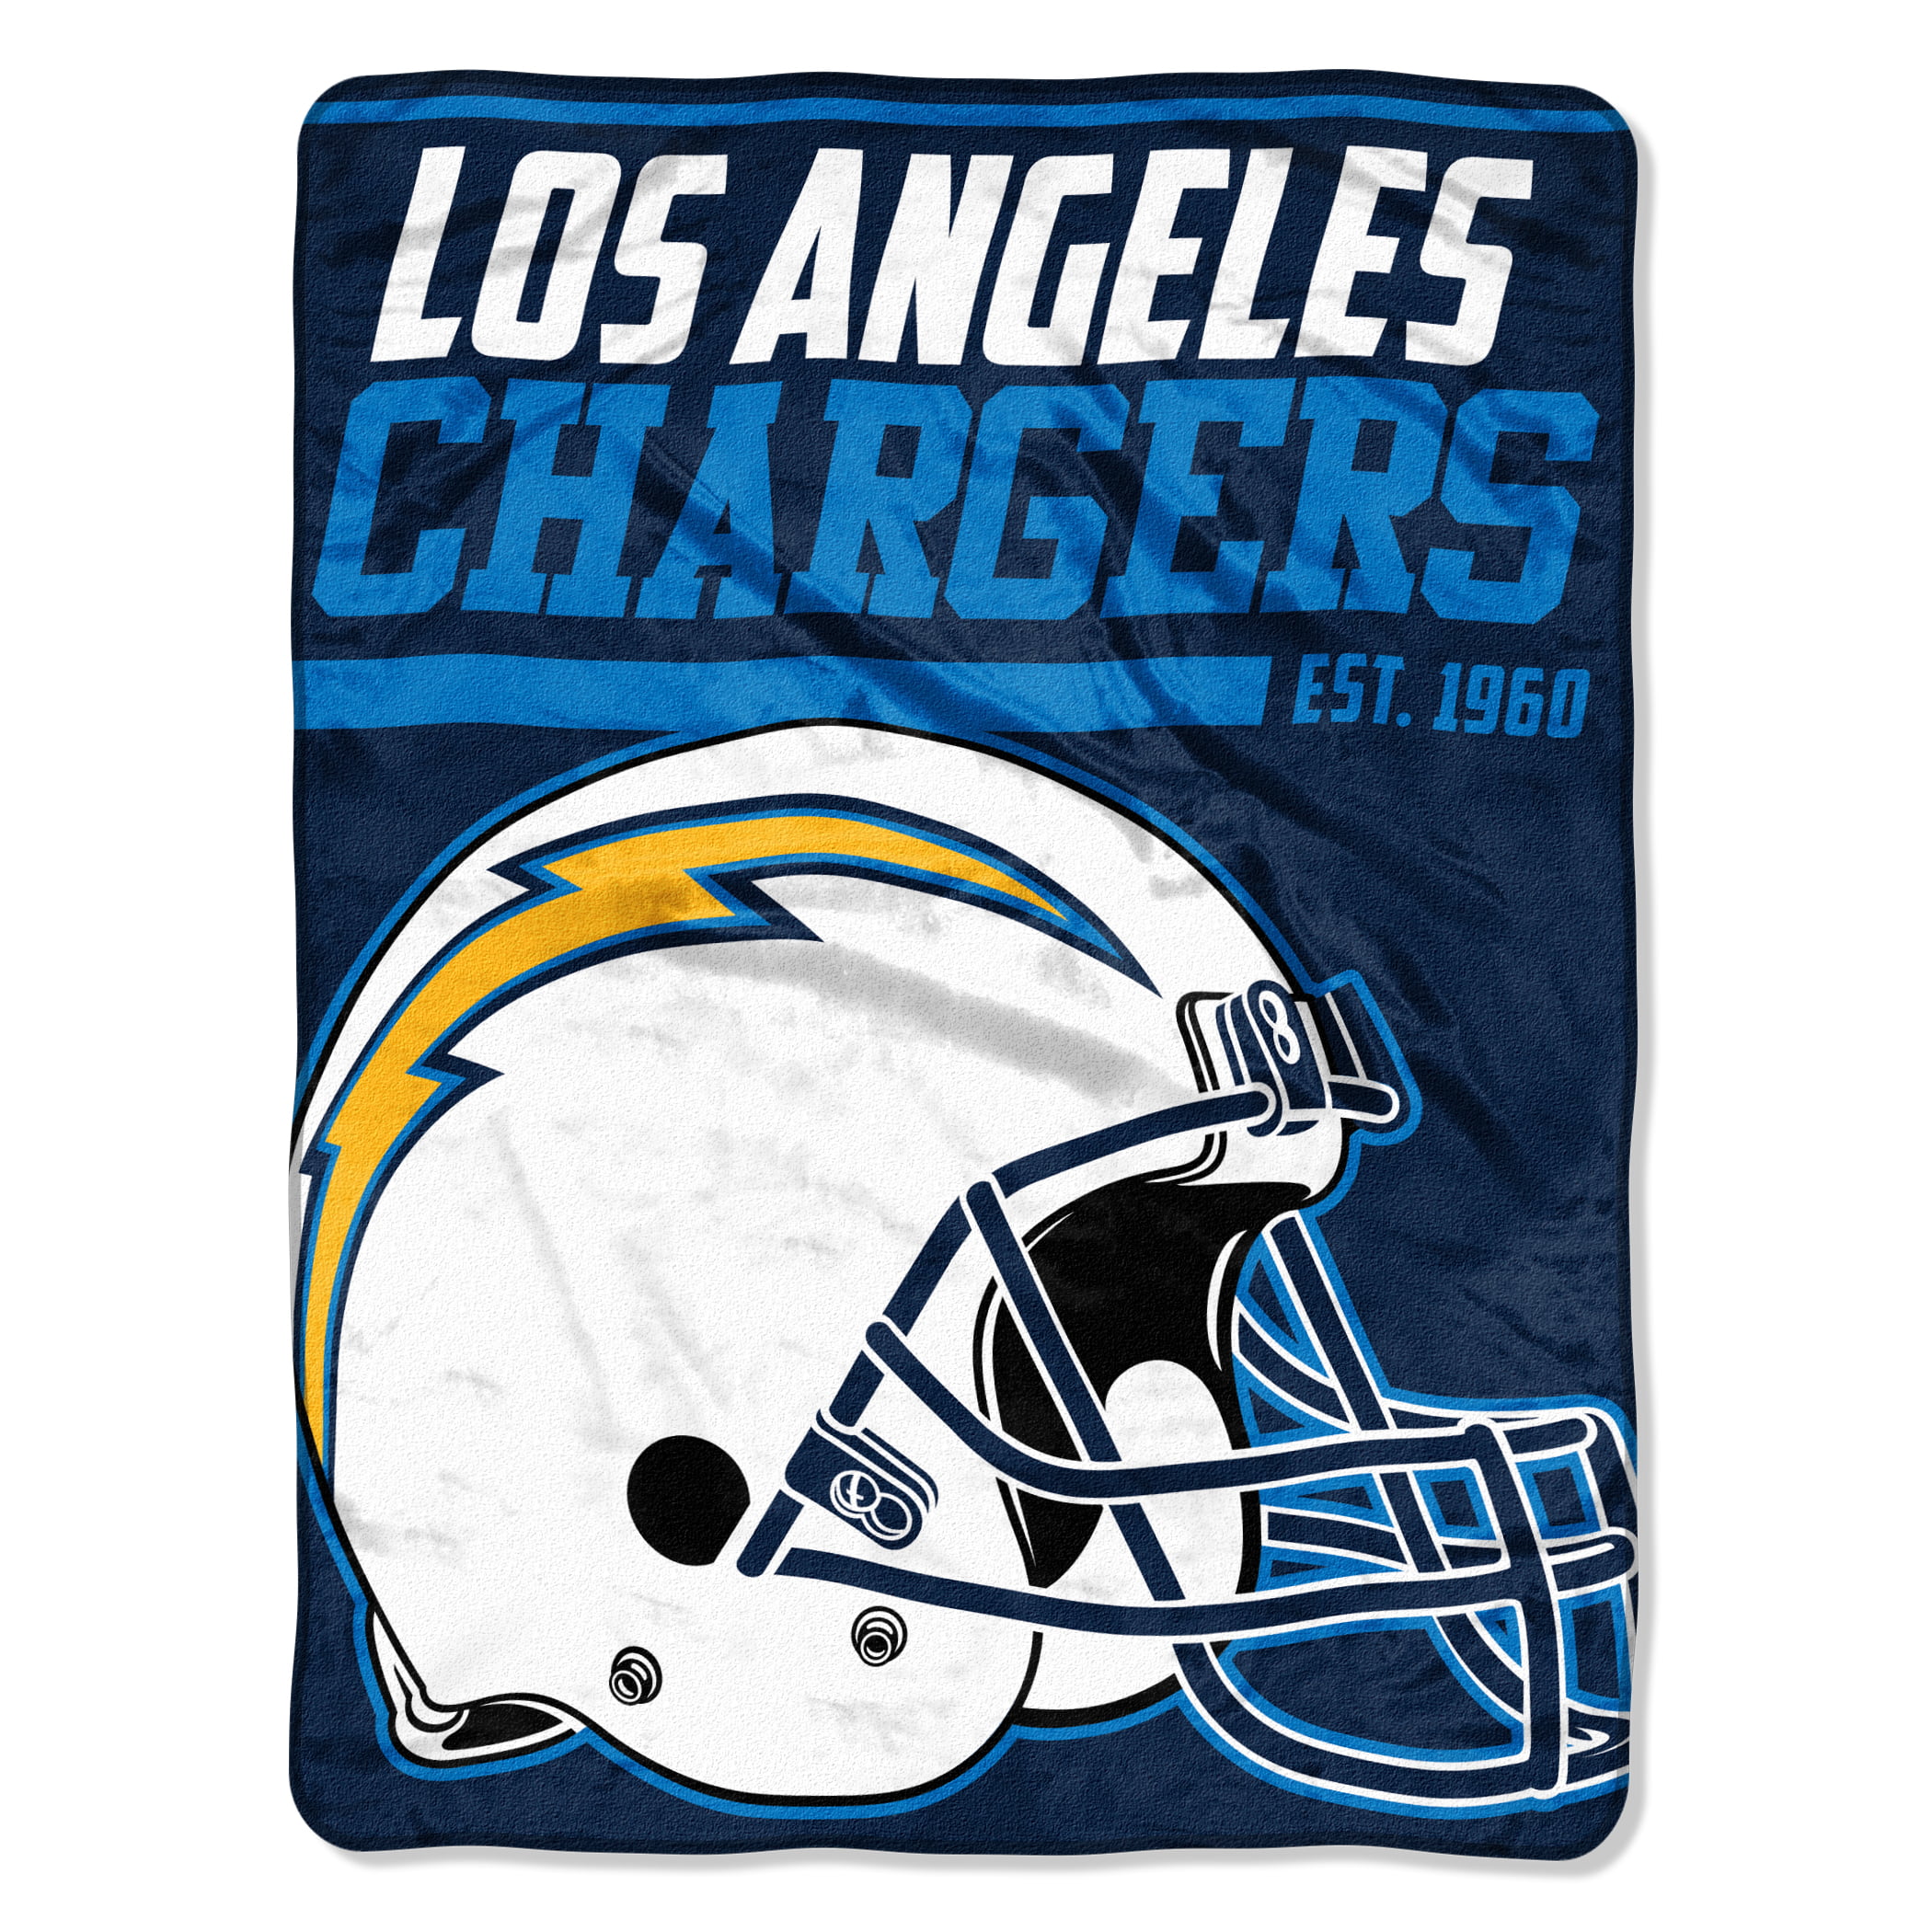 Los Angeles Chargers on X: that catch 